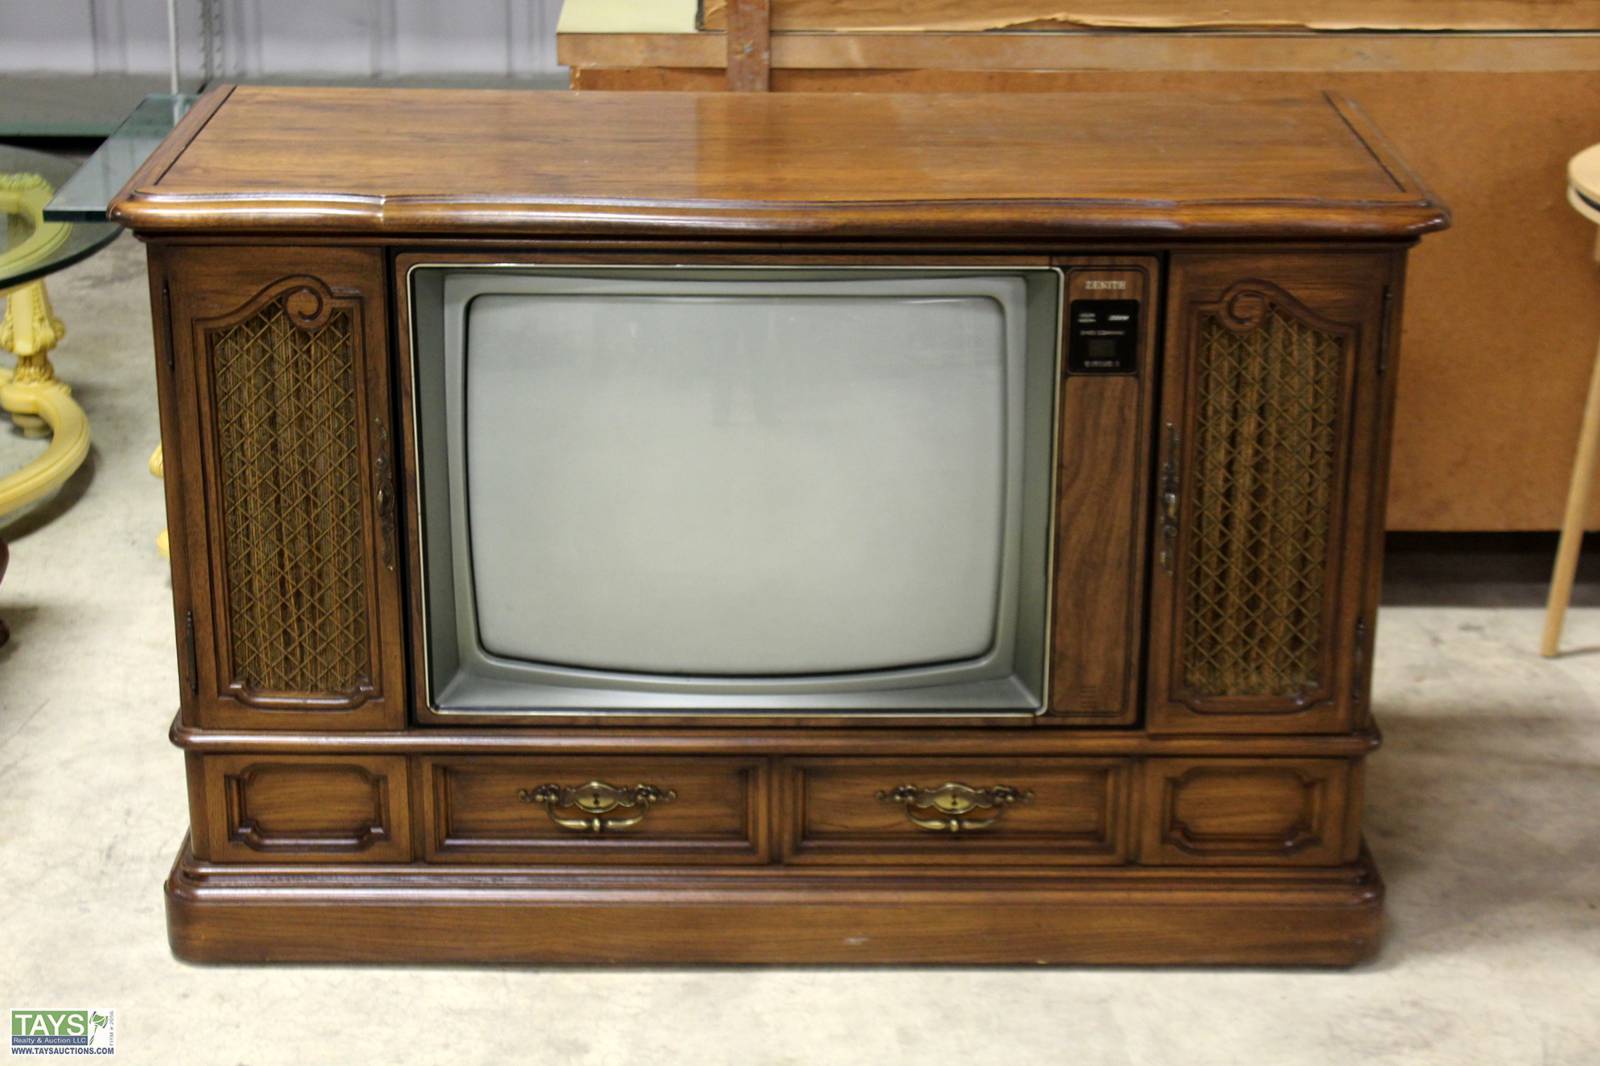 Tays Realty & Auction - Auction: ONLINE ABSOLUTE AUCTION: FURNITURE -  GLASSWARE - ANTIQUES ITEM: Wood Box Zenith Color Sentry Zoom Space Command  TV